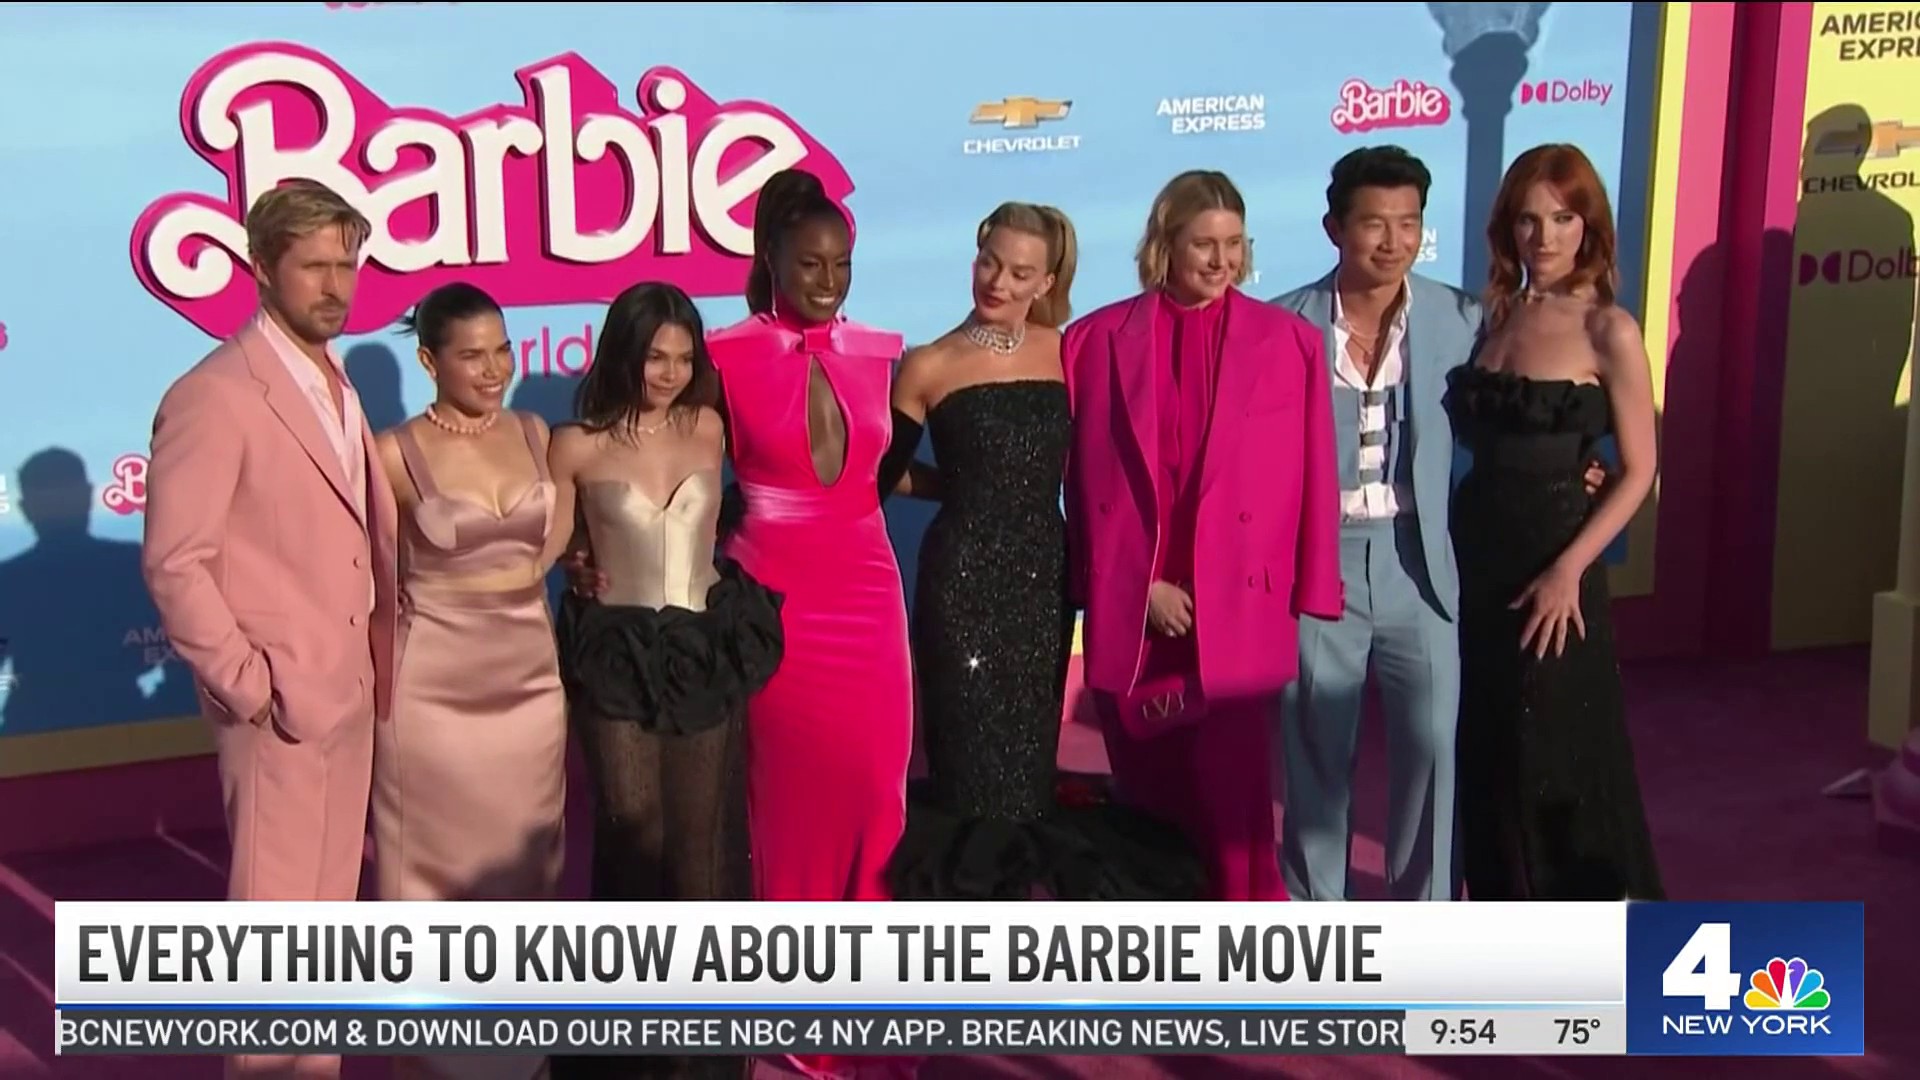 Everything to know about the Barbie movie